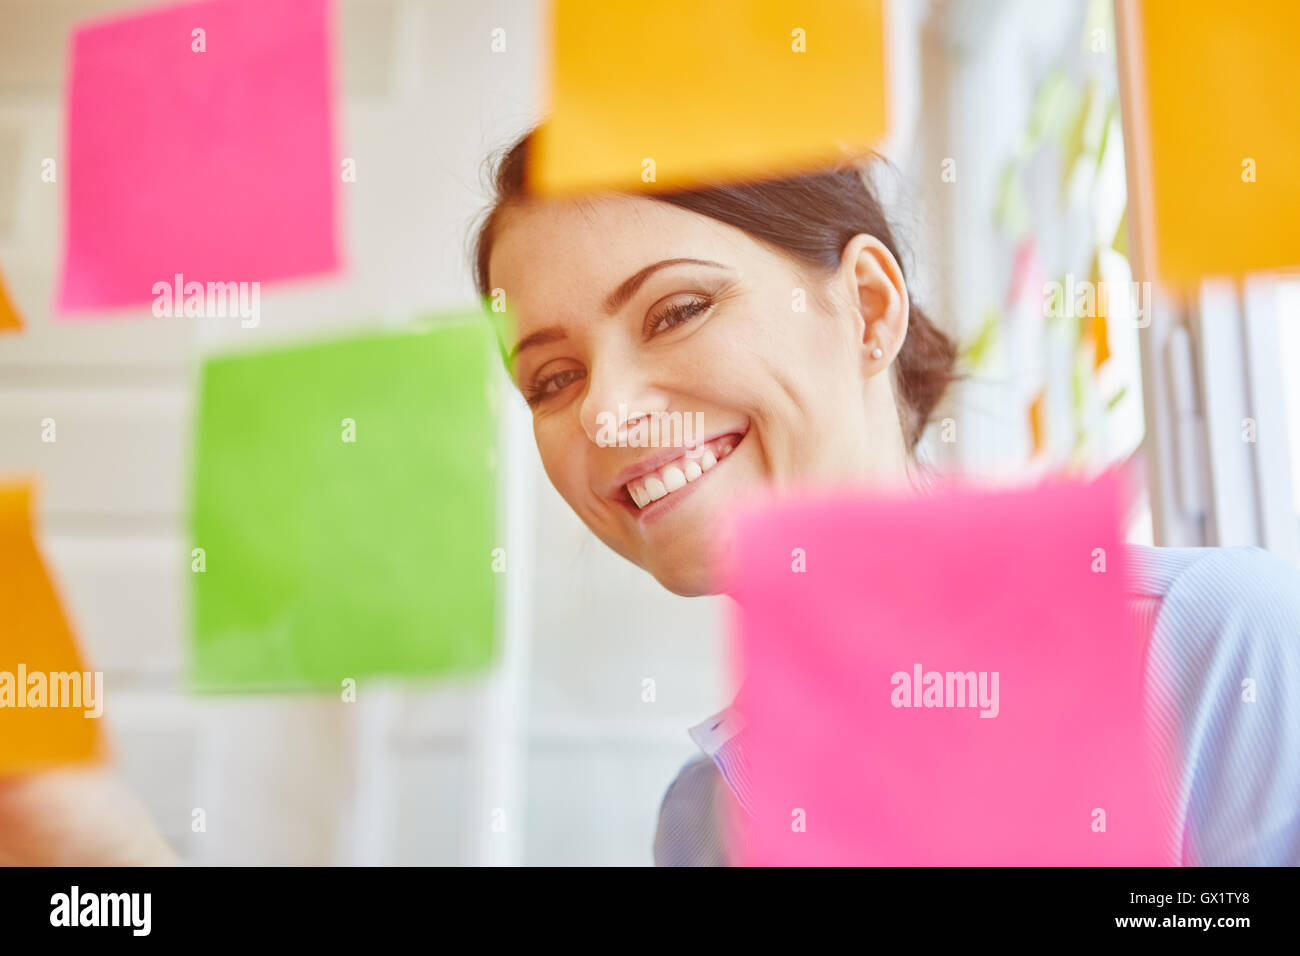 Smiling successful businesswoman gathering ideas on sticky notes Stock Photo